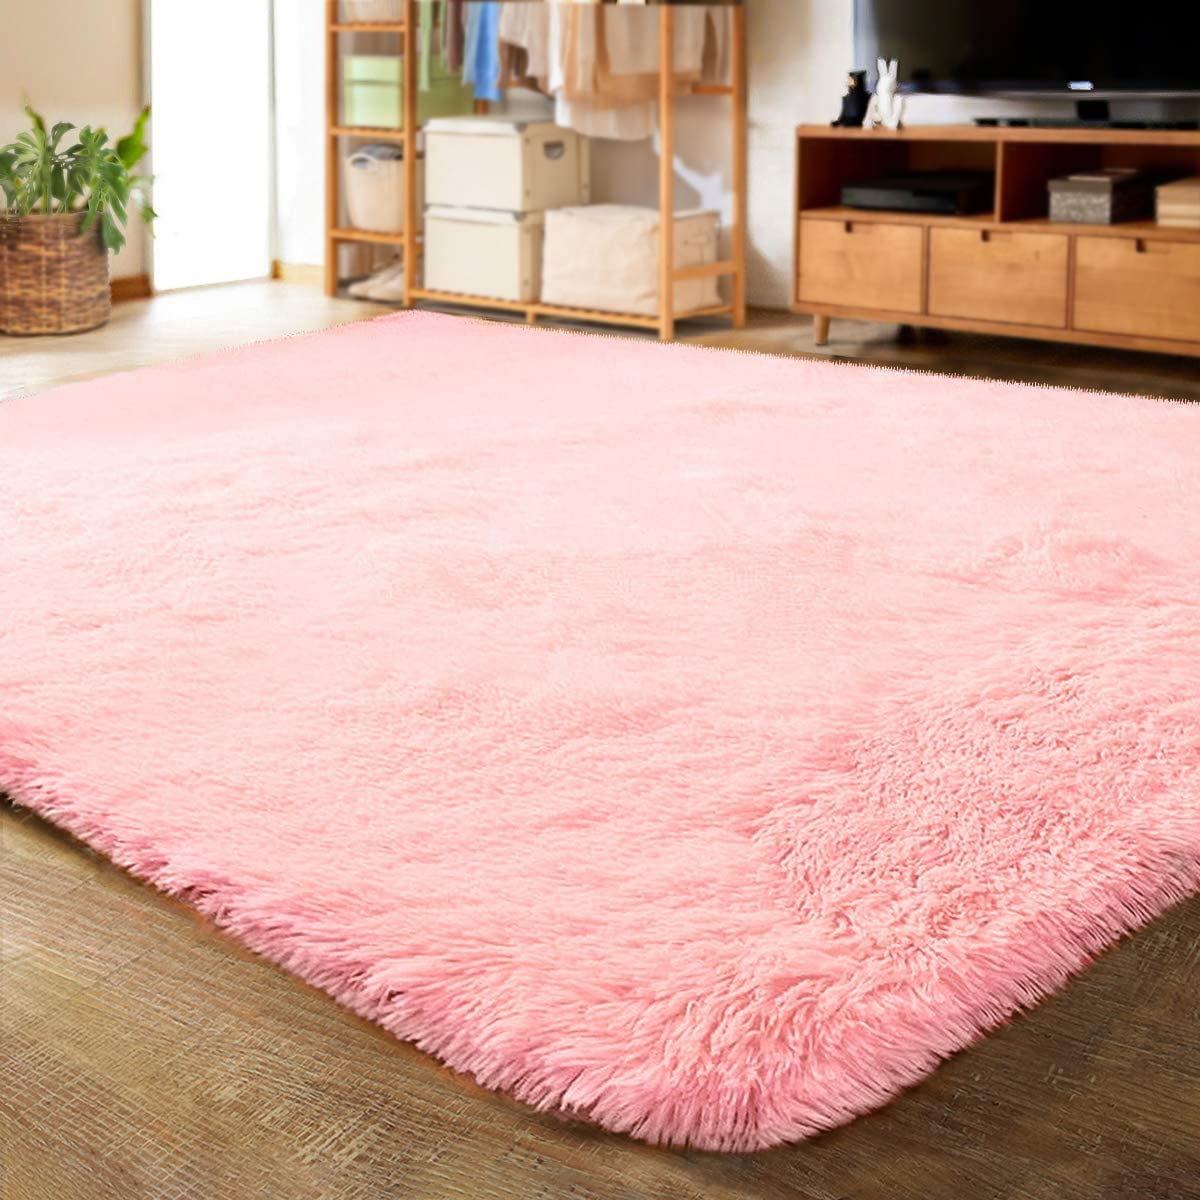 Thick Soft Plain Shaggy Rugs Small Large XL Cheap Shag Pile Mats Best Pink Rugs 